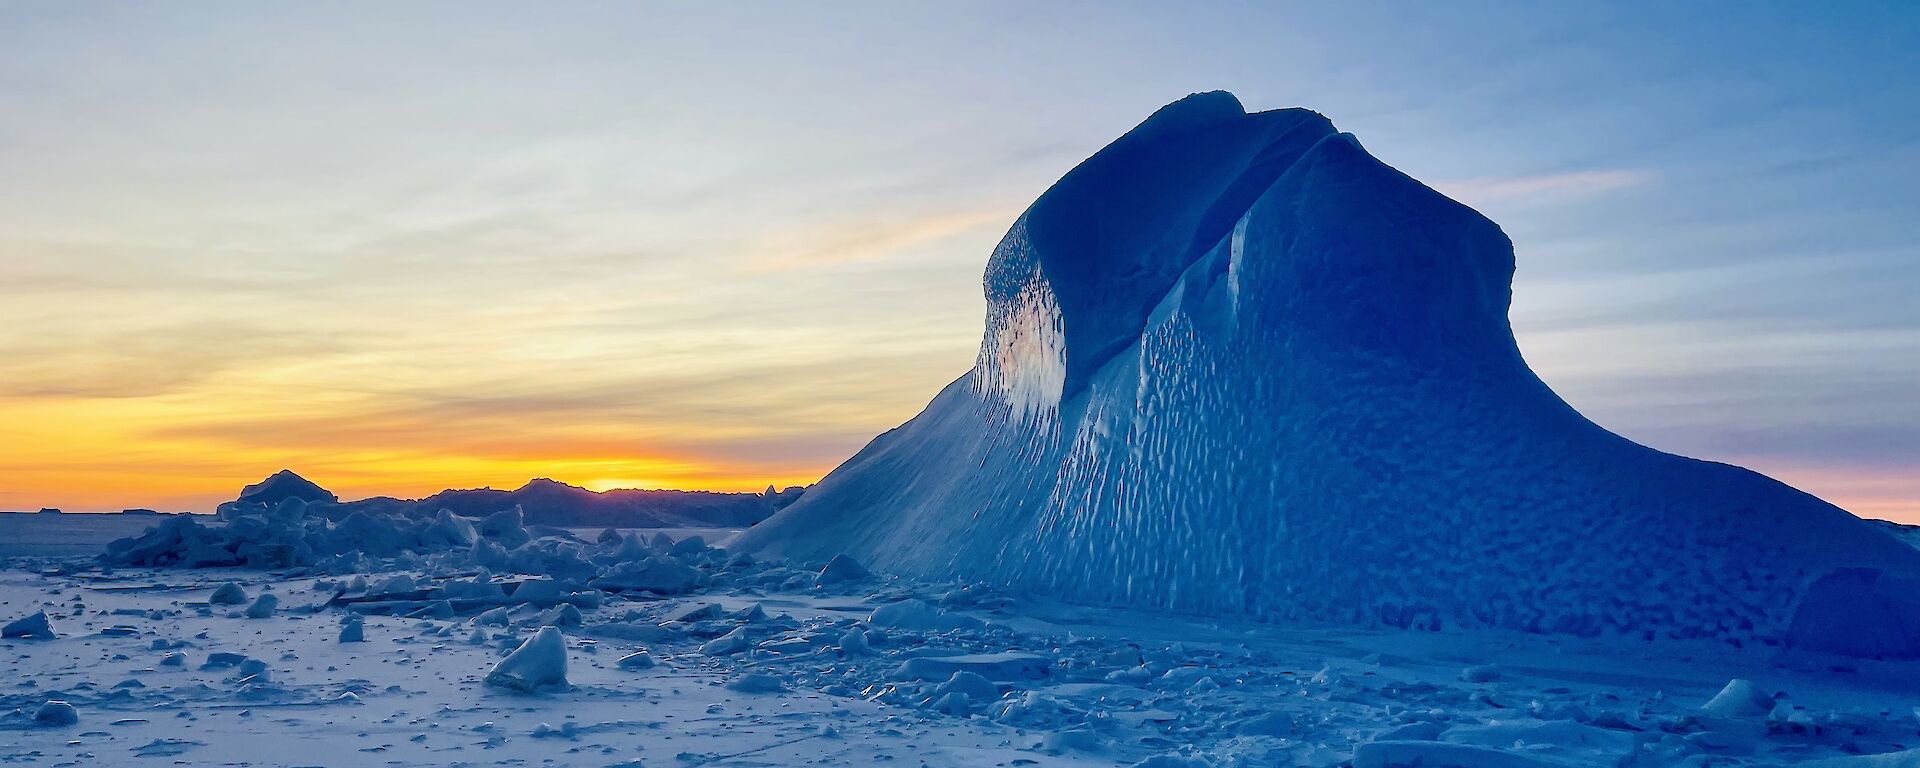 A tall blue iceberg pokes out of the frozen sea-ice. The distant horizon is shades of yellow and orange.